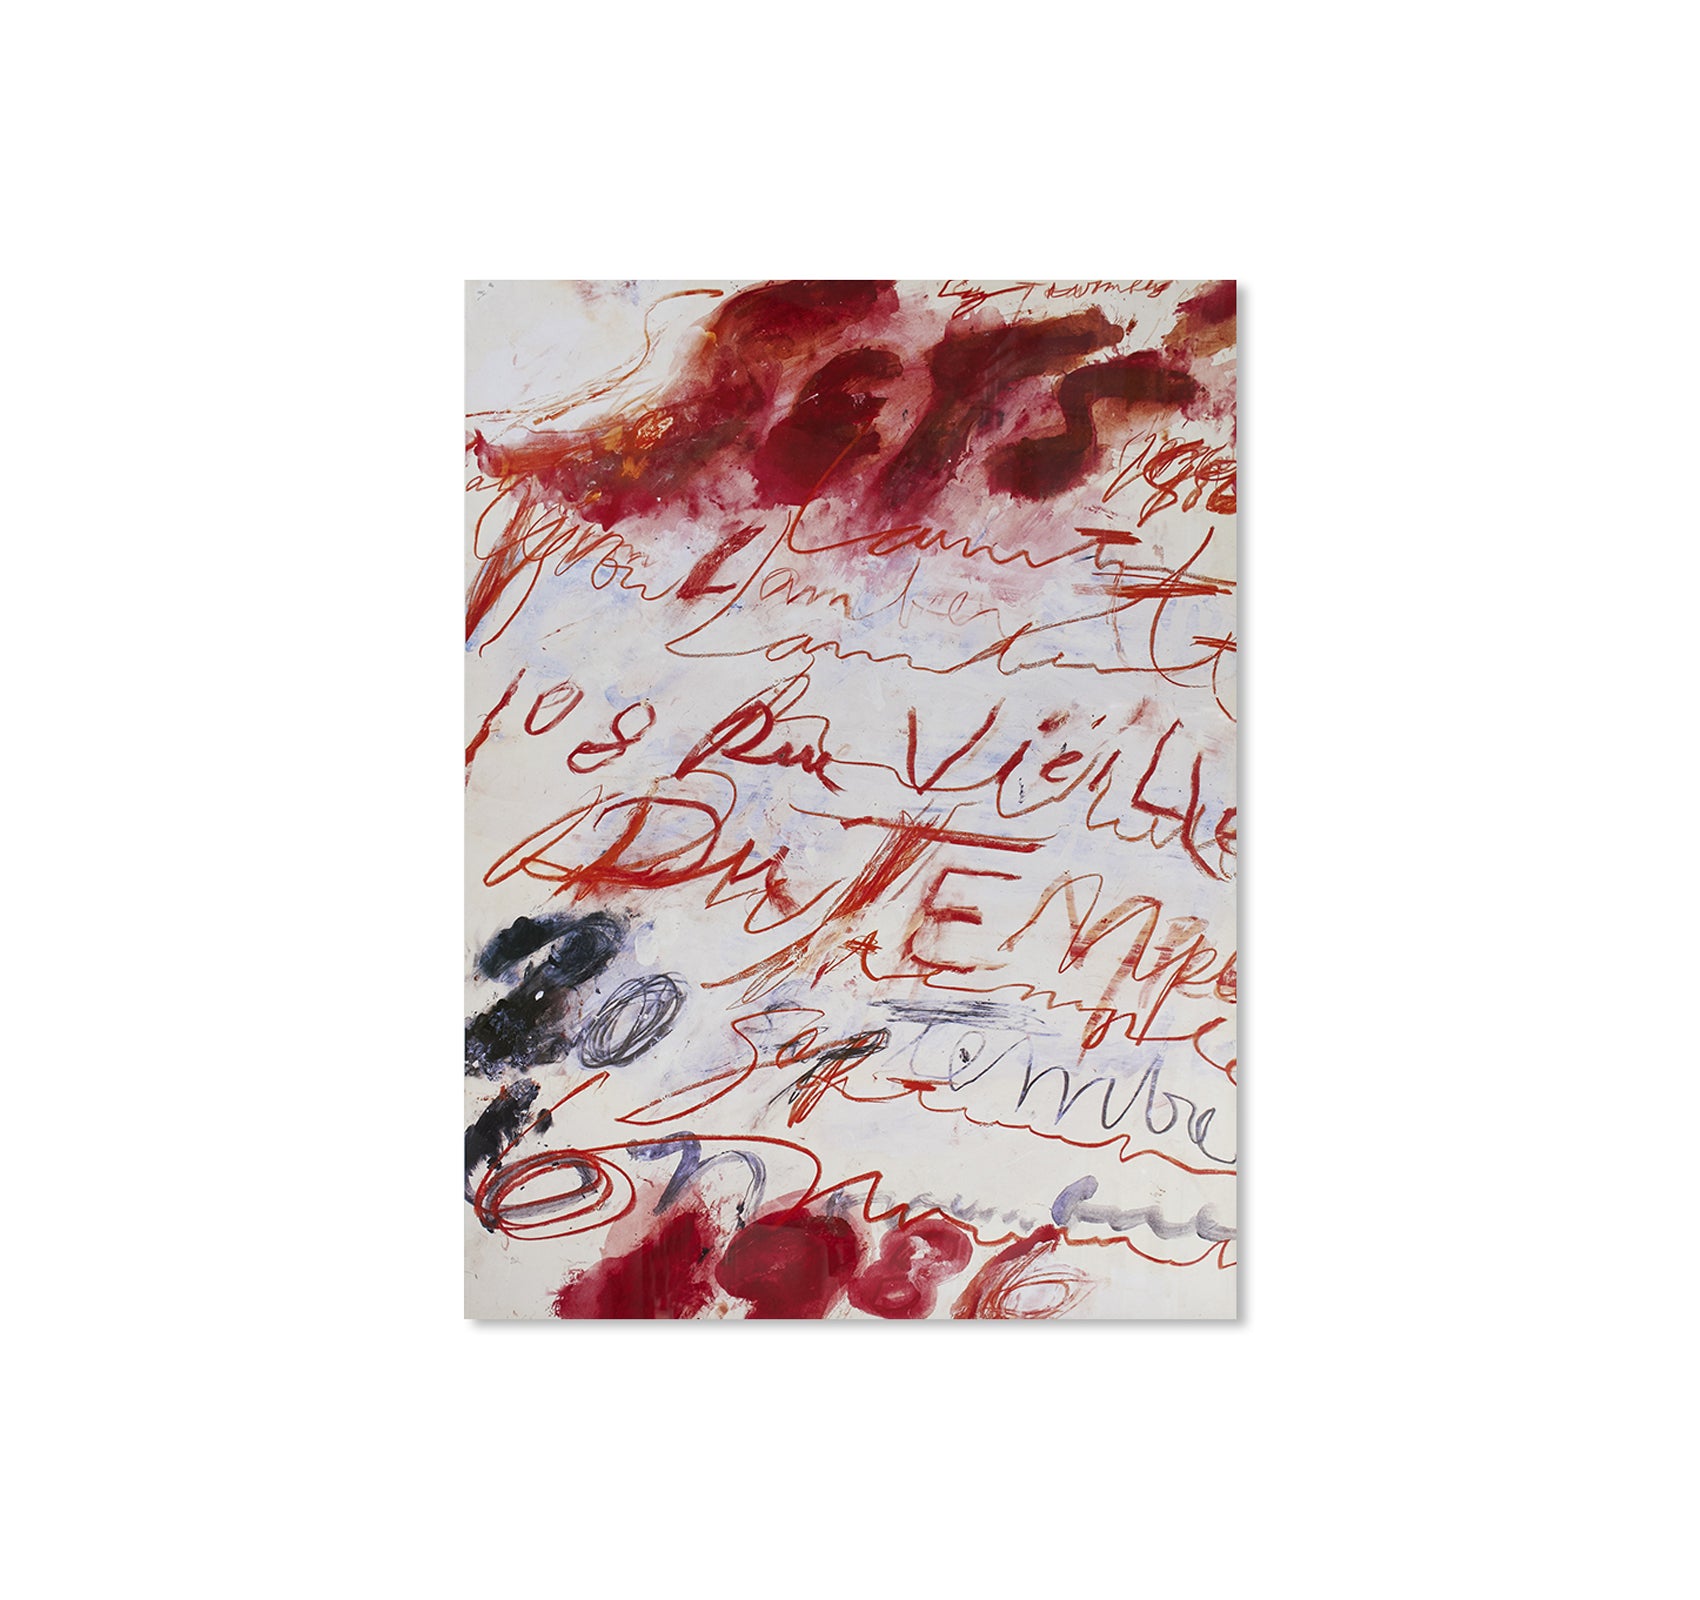 PRINT (1986) by Cy Twombly